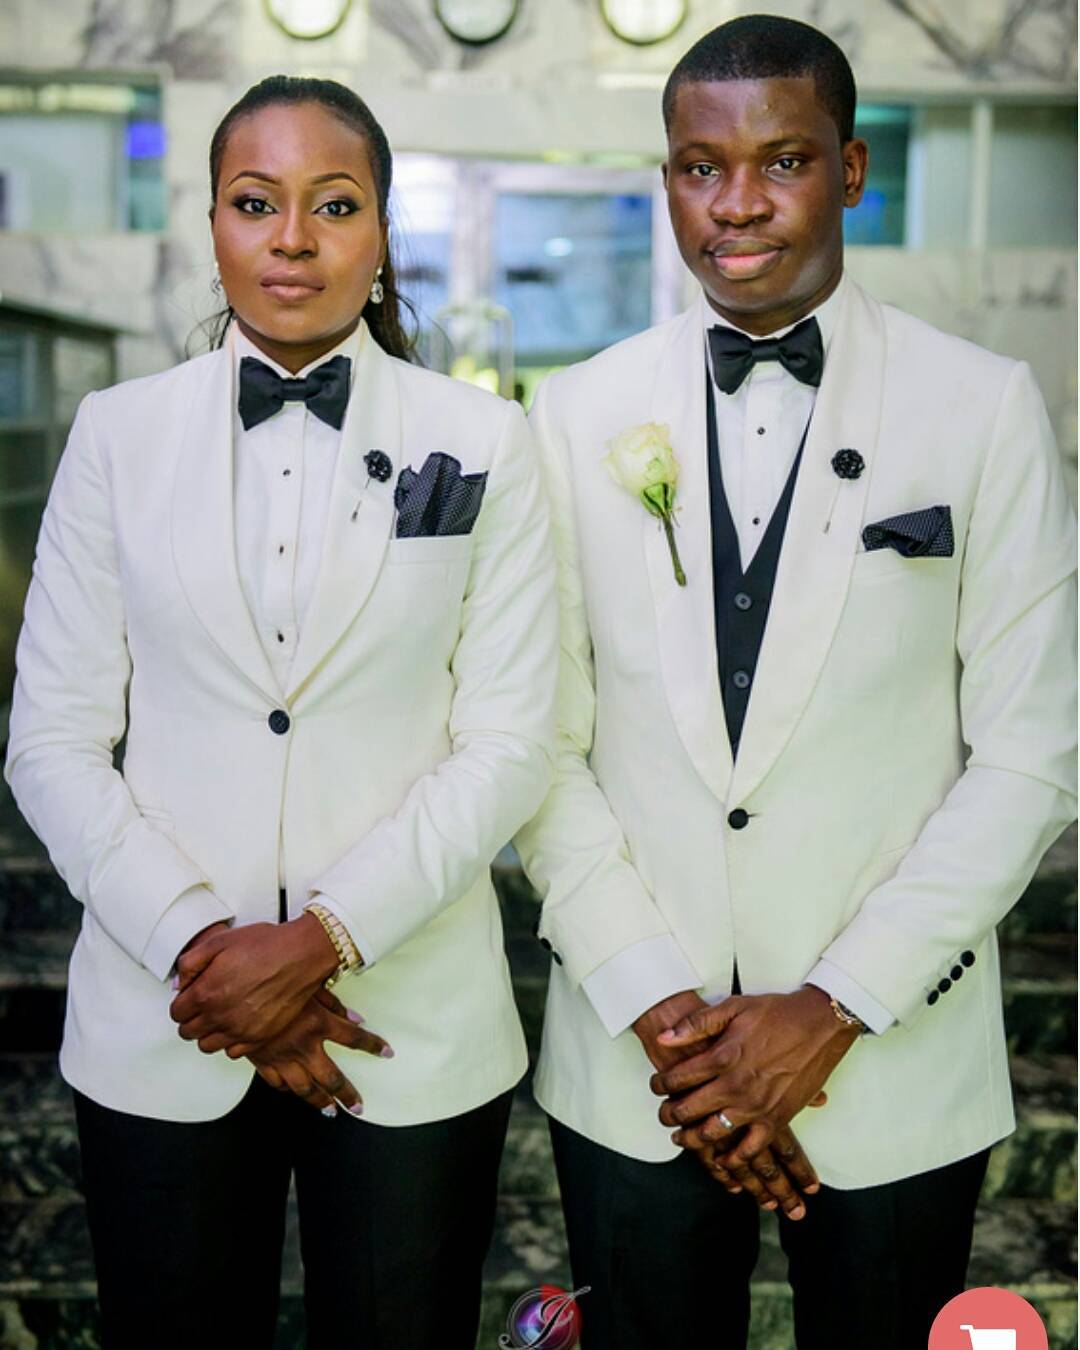 Lady Is Her Brother's Best Man At His Wedding In Nigeria